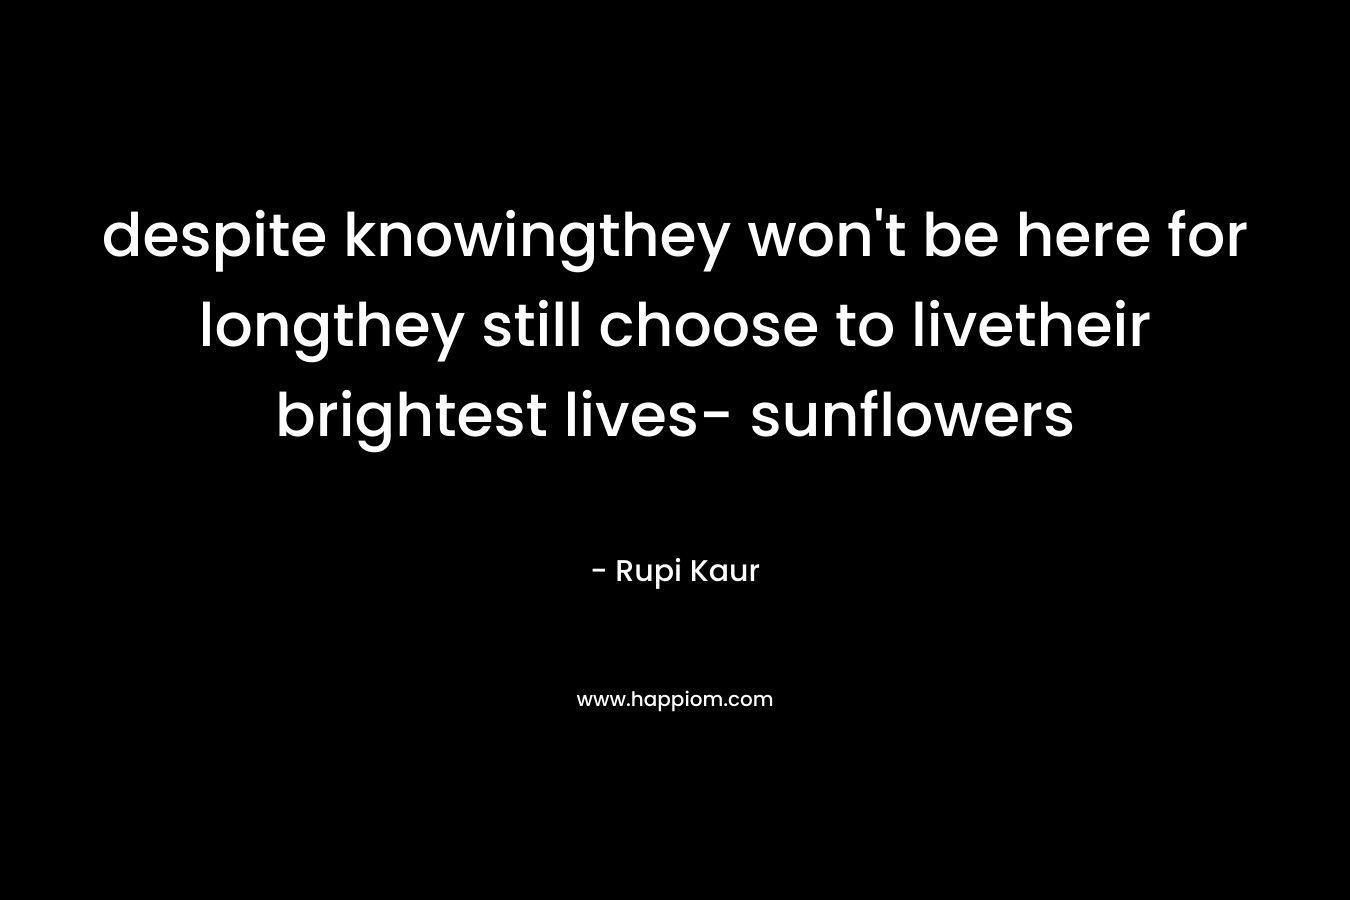 despite knowingthey won't be here for longthey still choose to livetheir brightest lives- sunflowers